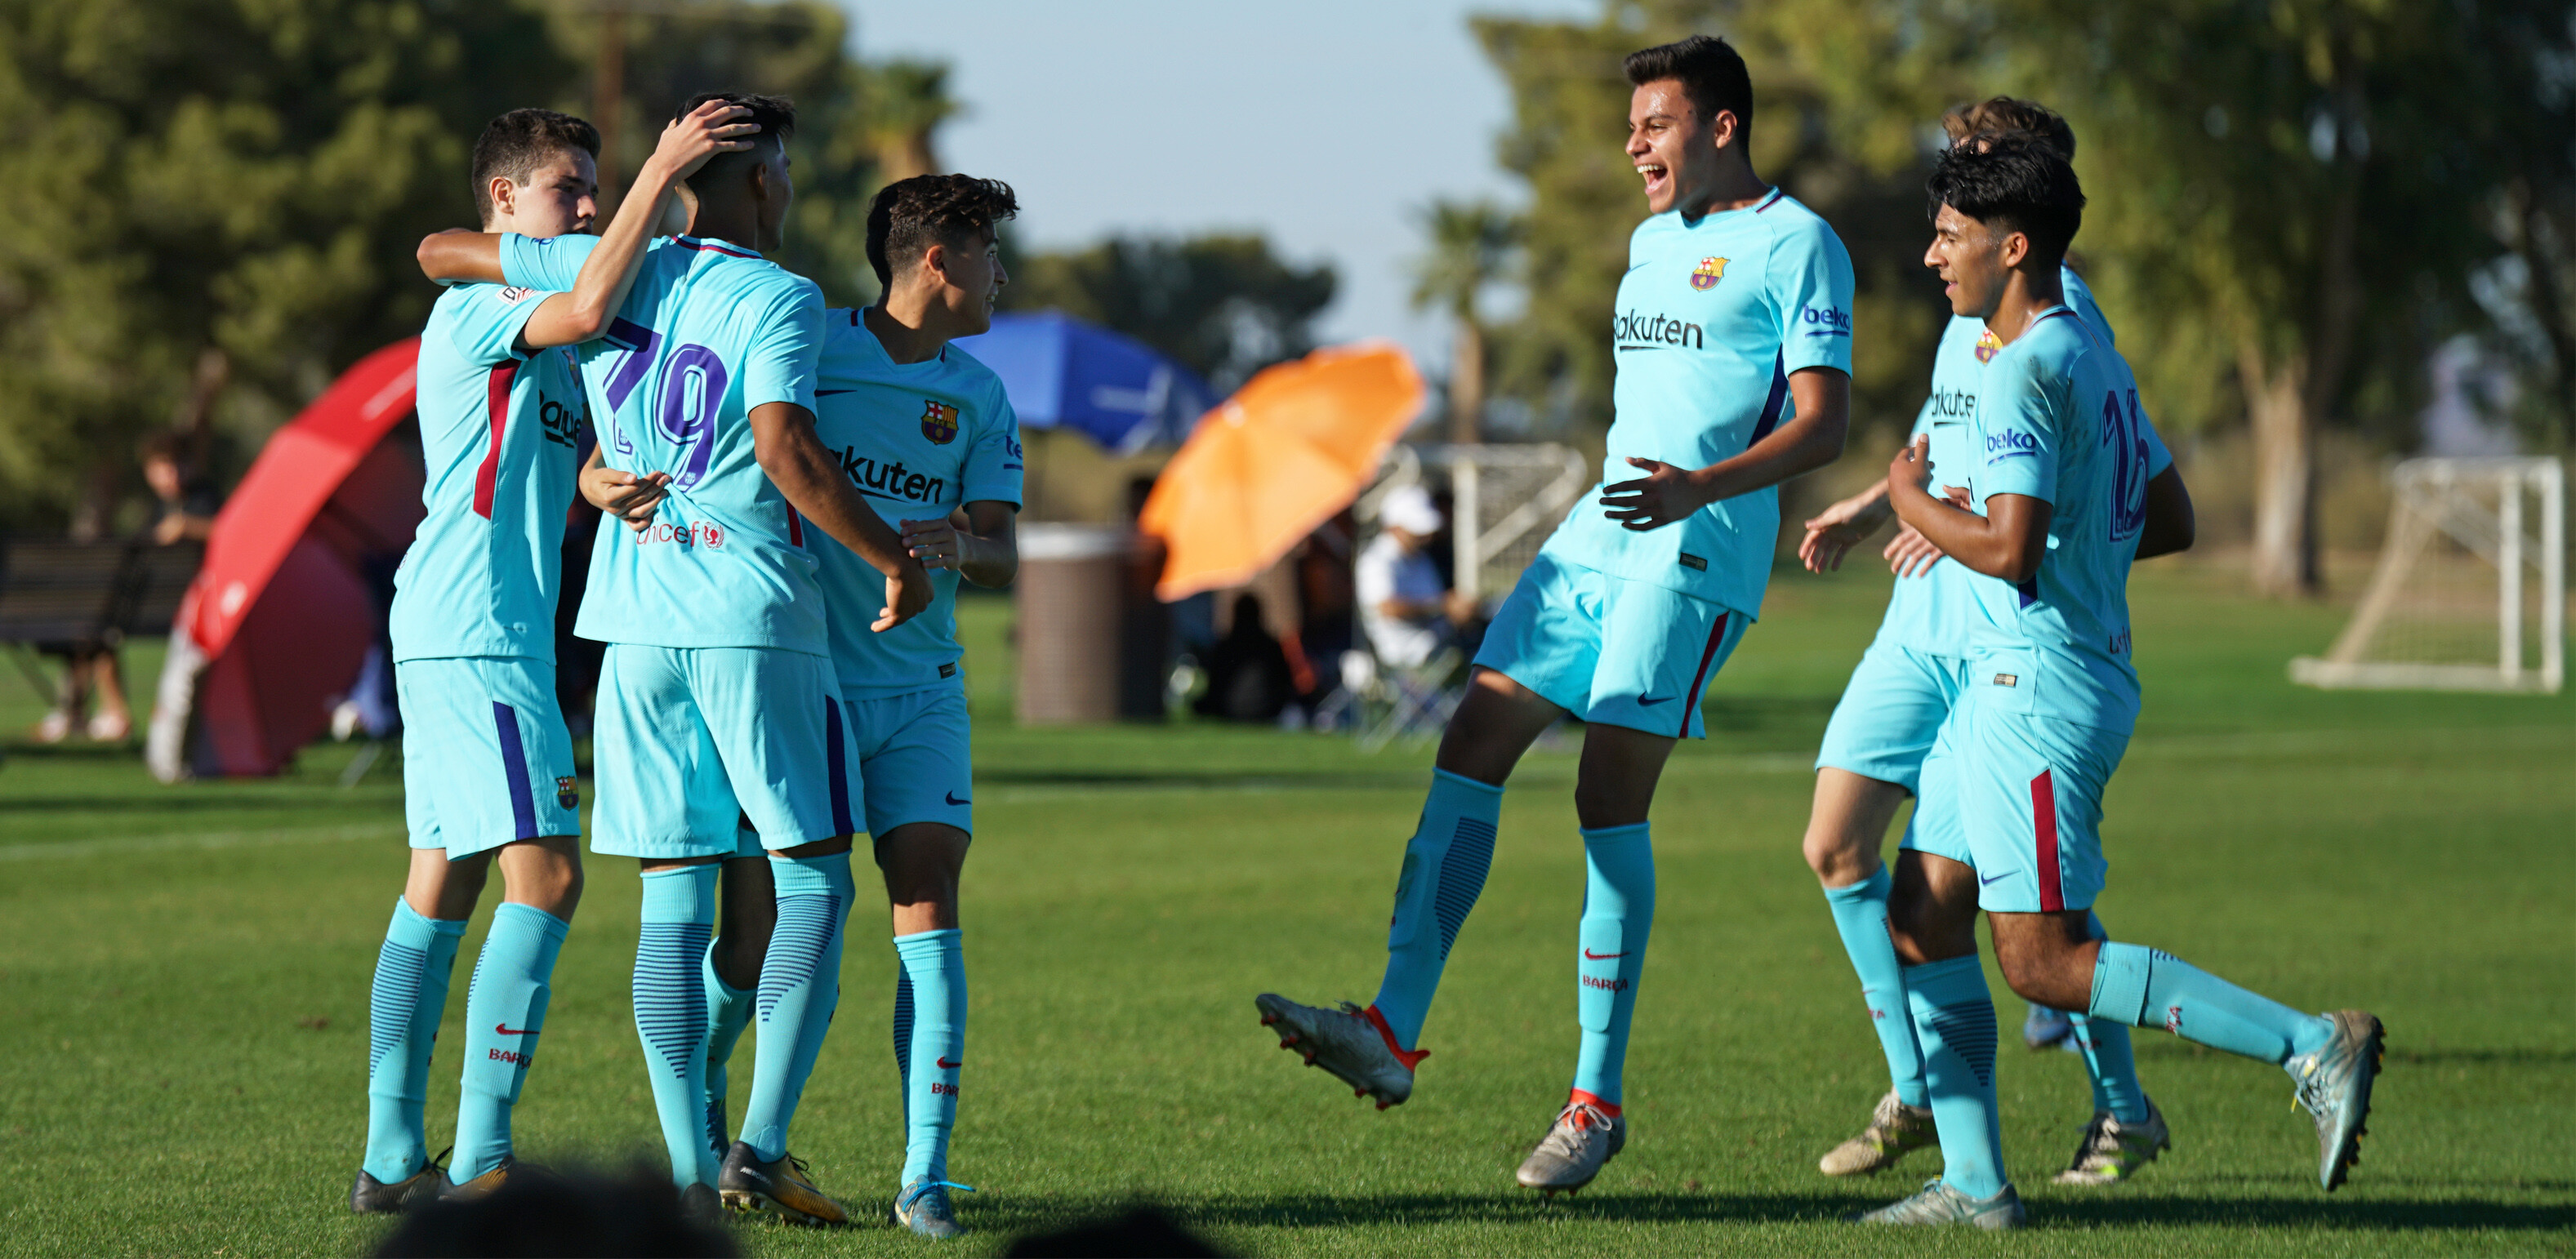 Barca Residential Academy celebrating after scoring a goal